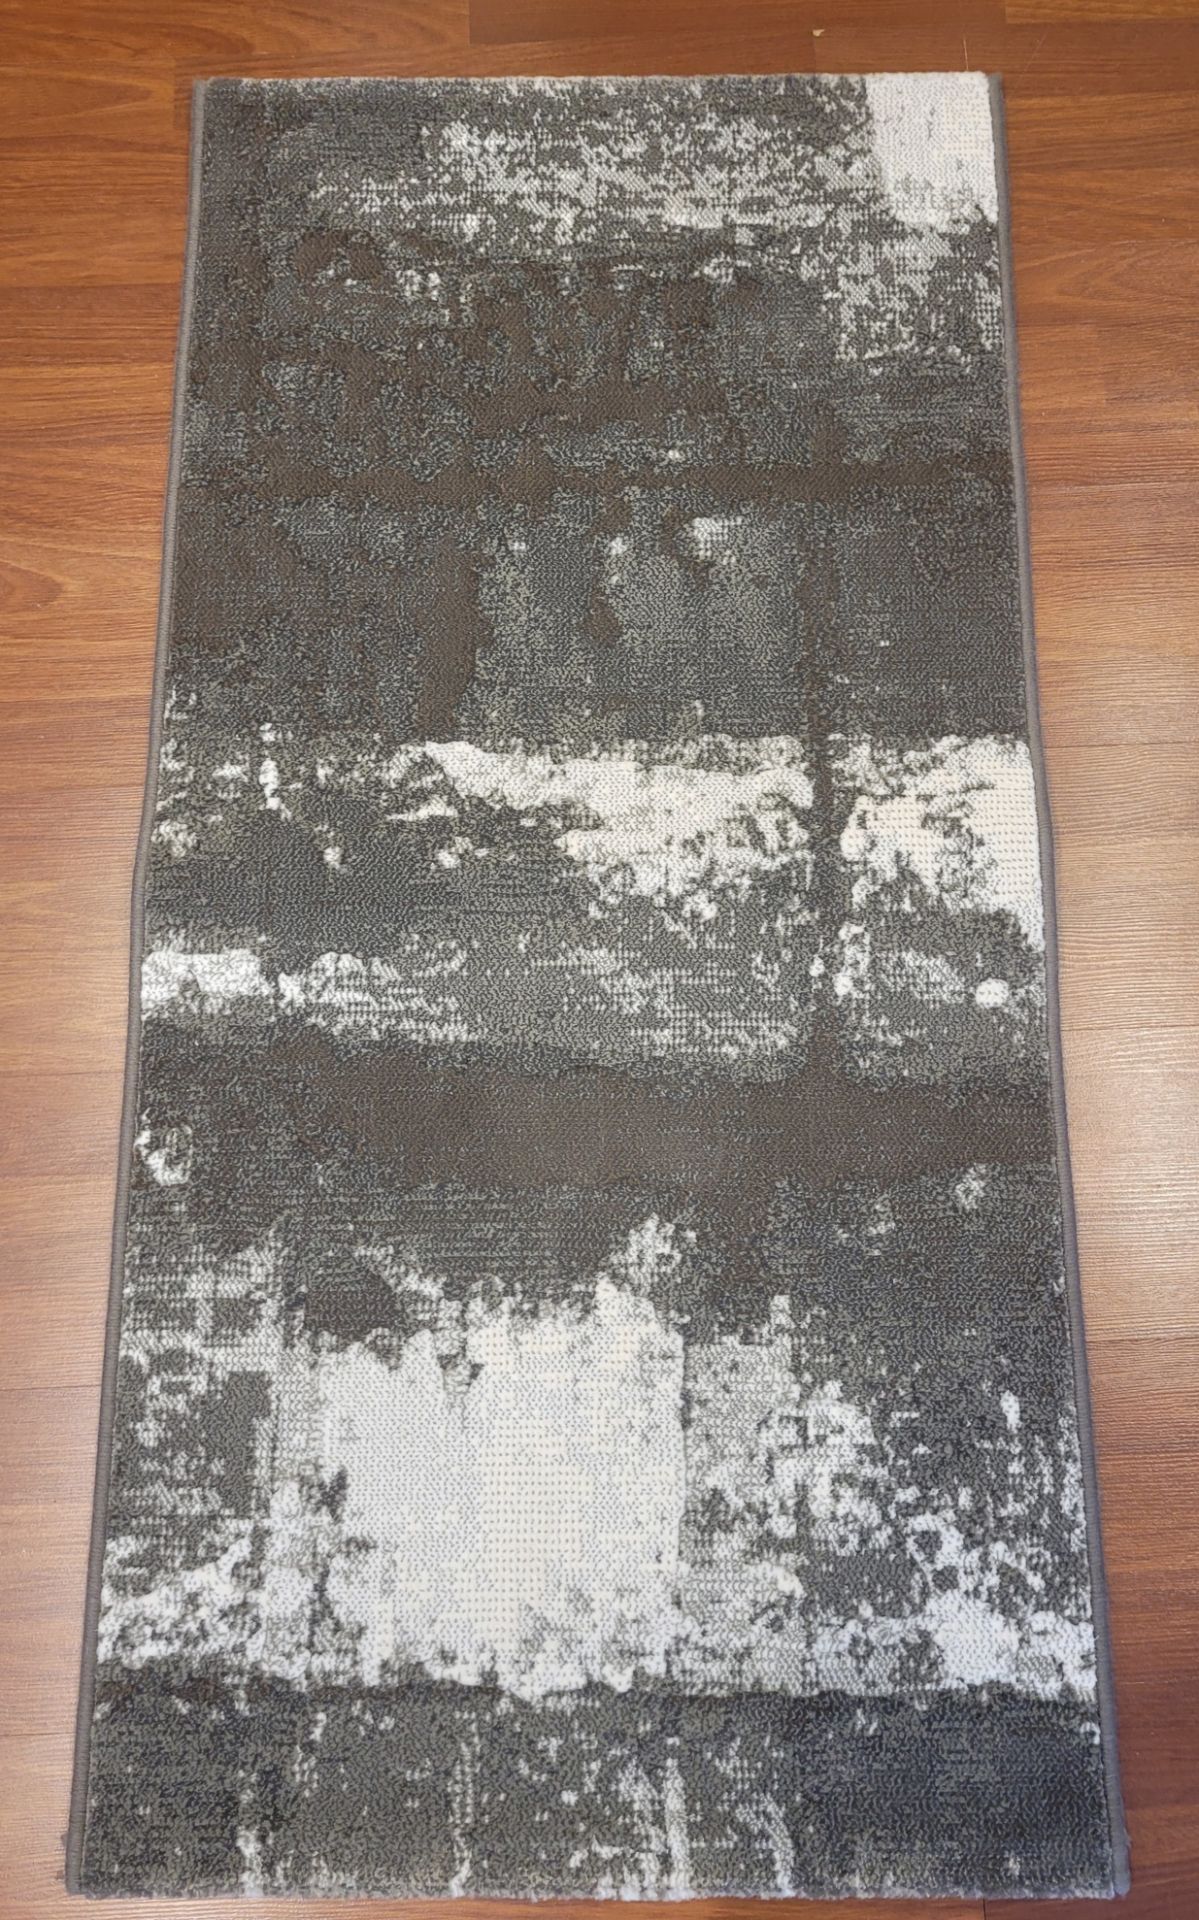 2' X 4' NAXOS MADE IN BELGIUM - MSRP $199.00 EA. (LOCATED IN WALL-TO-WALL) INVENTORY CODE: 12-37